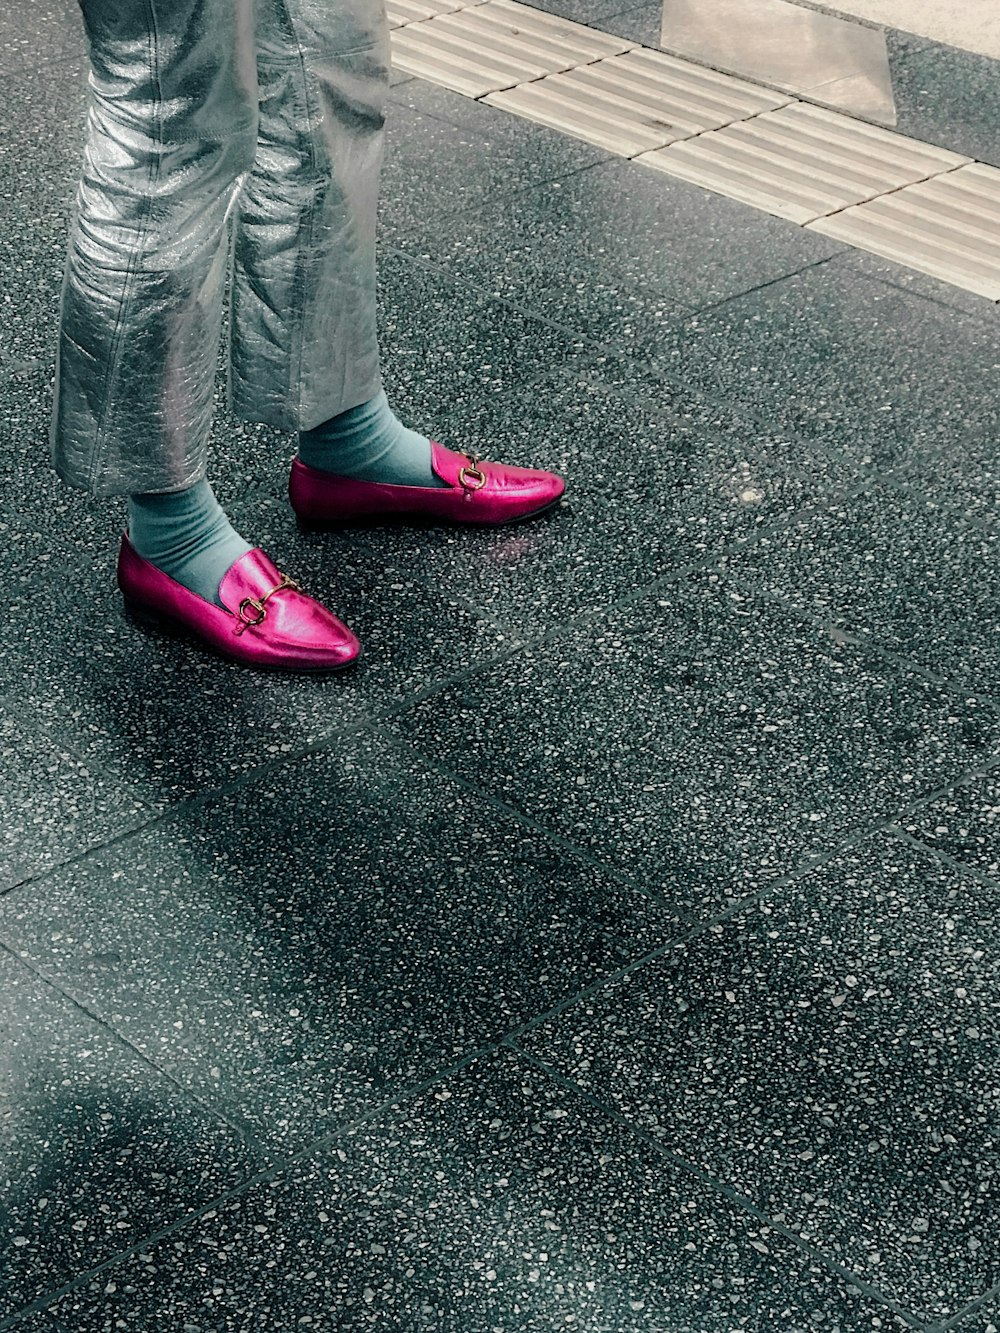 person wearing pink sandals